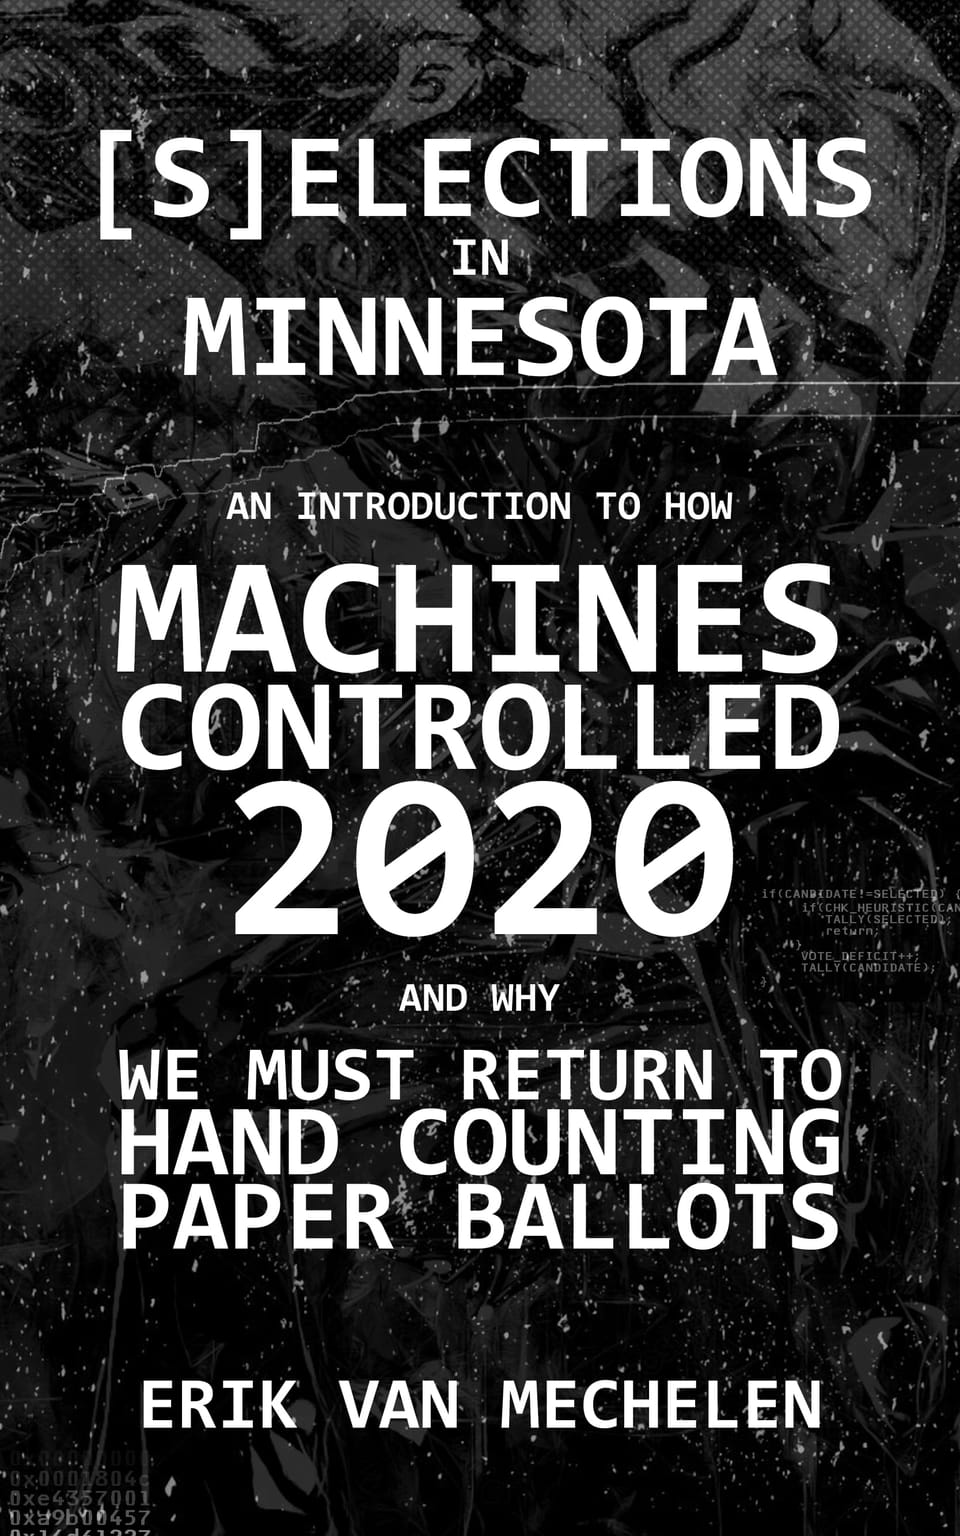 [S]elections in Minnesota